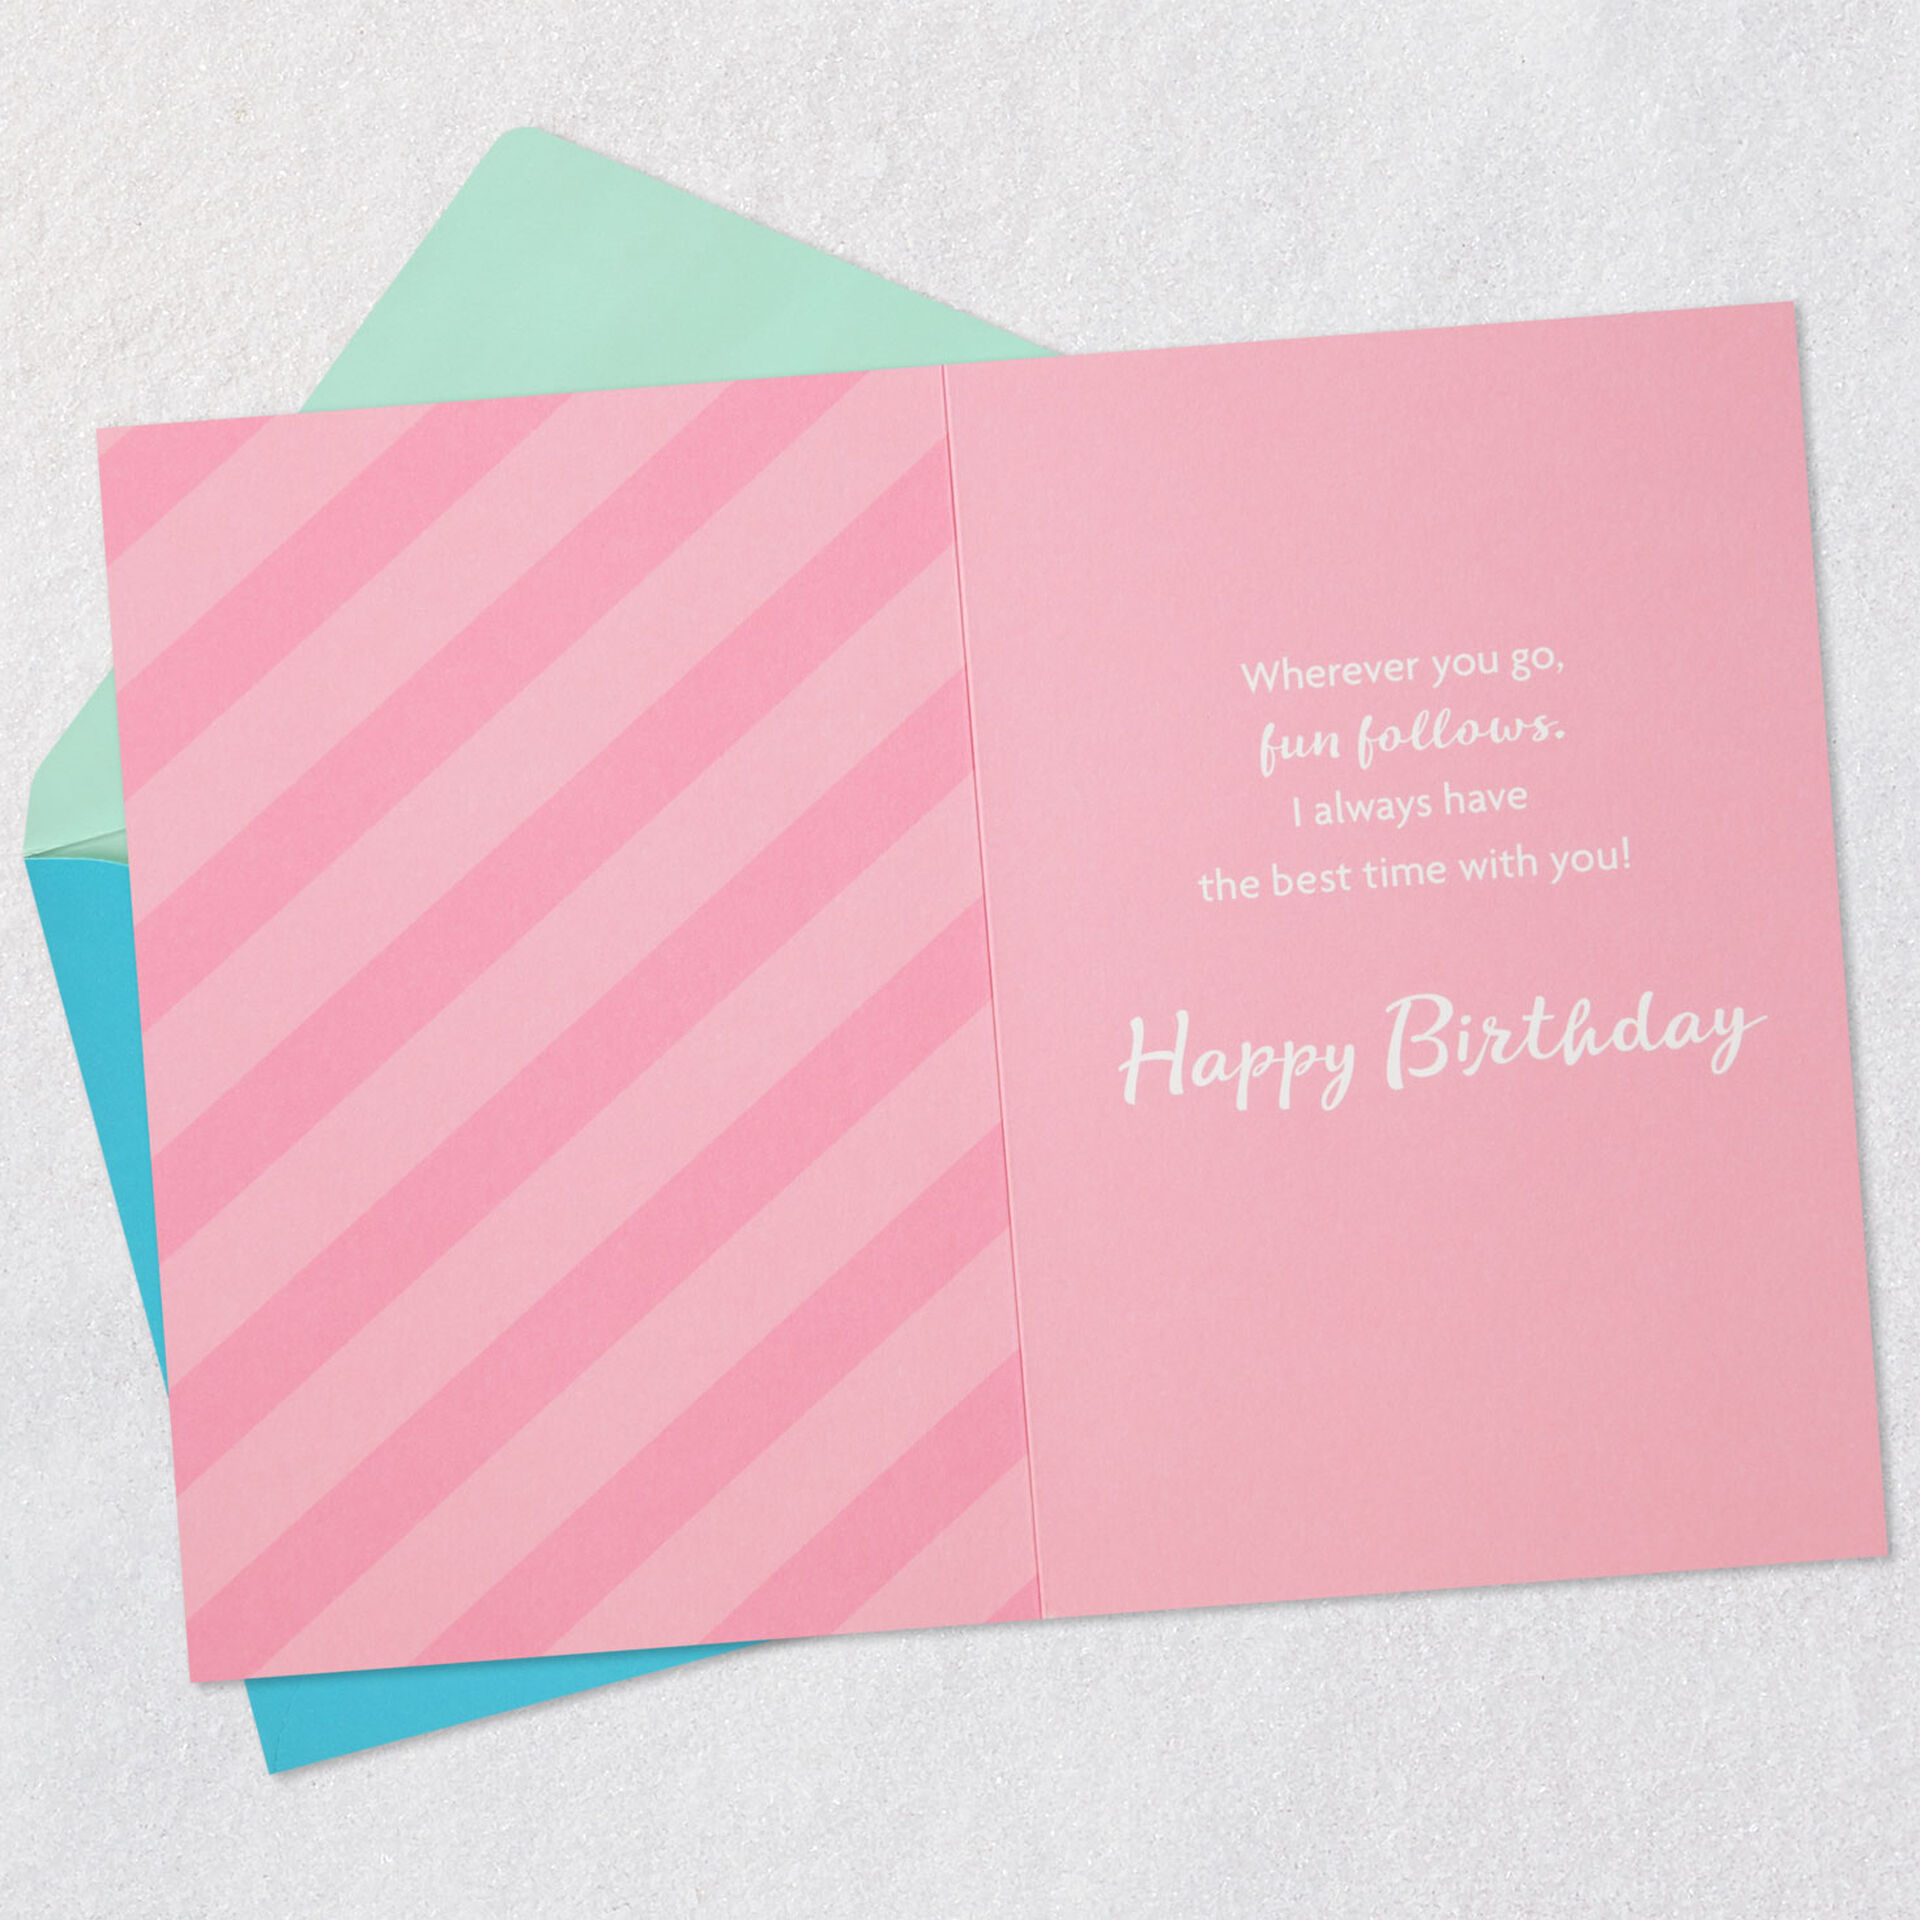 Friend-Pool-Floats-Birthday-Card-for-Her_299HBD3810_03